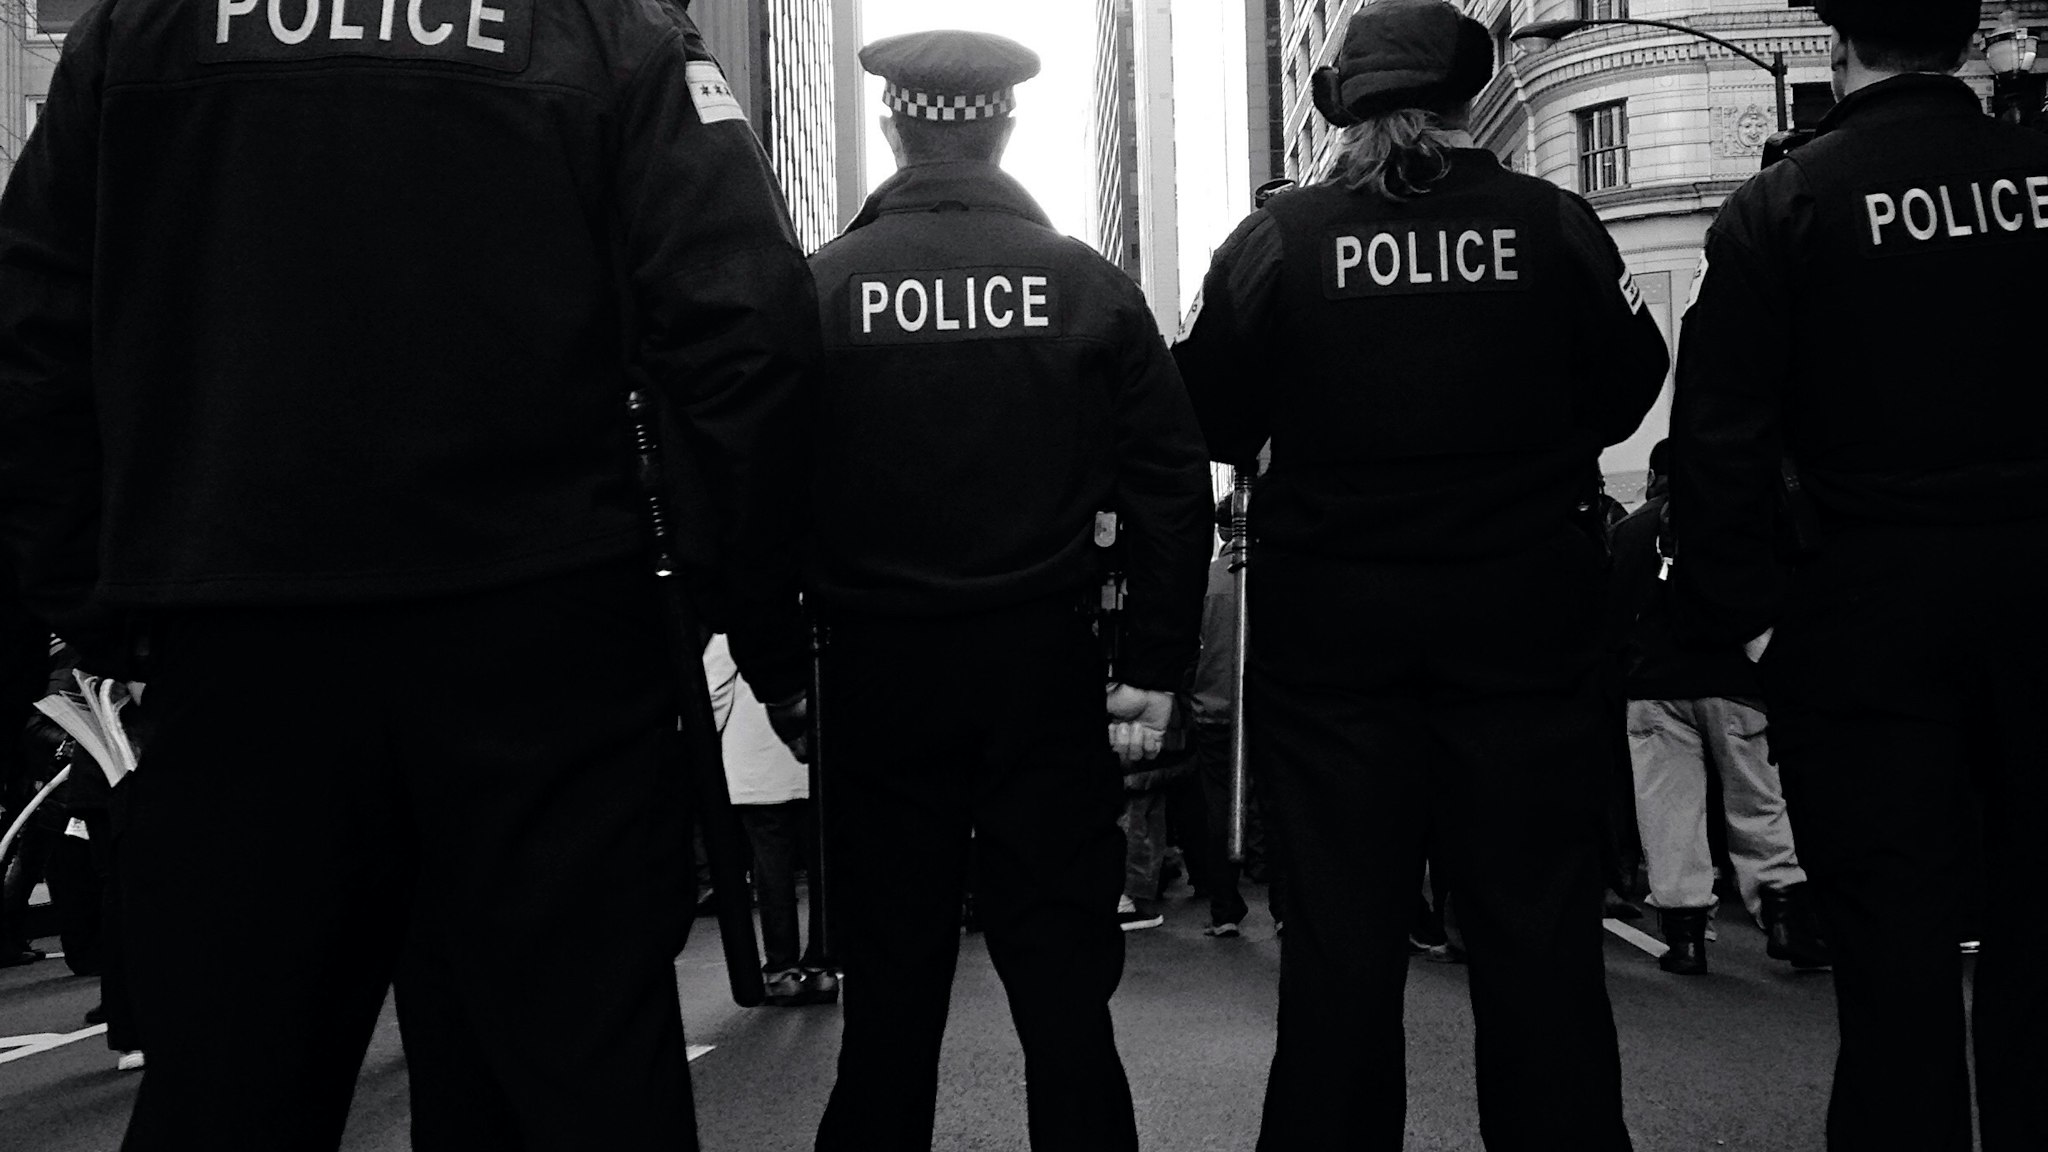 Rear View Of Police Force Standing On Street Against Buildings In City - stock photo